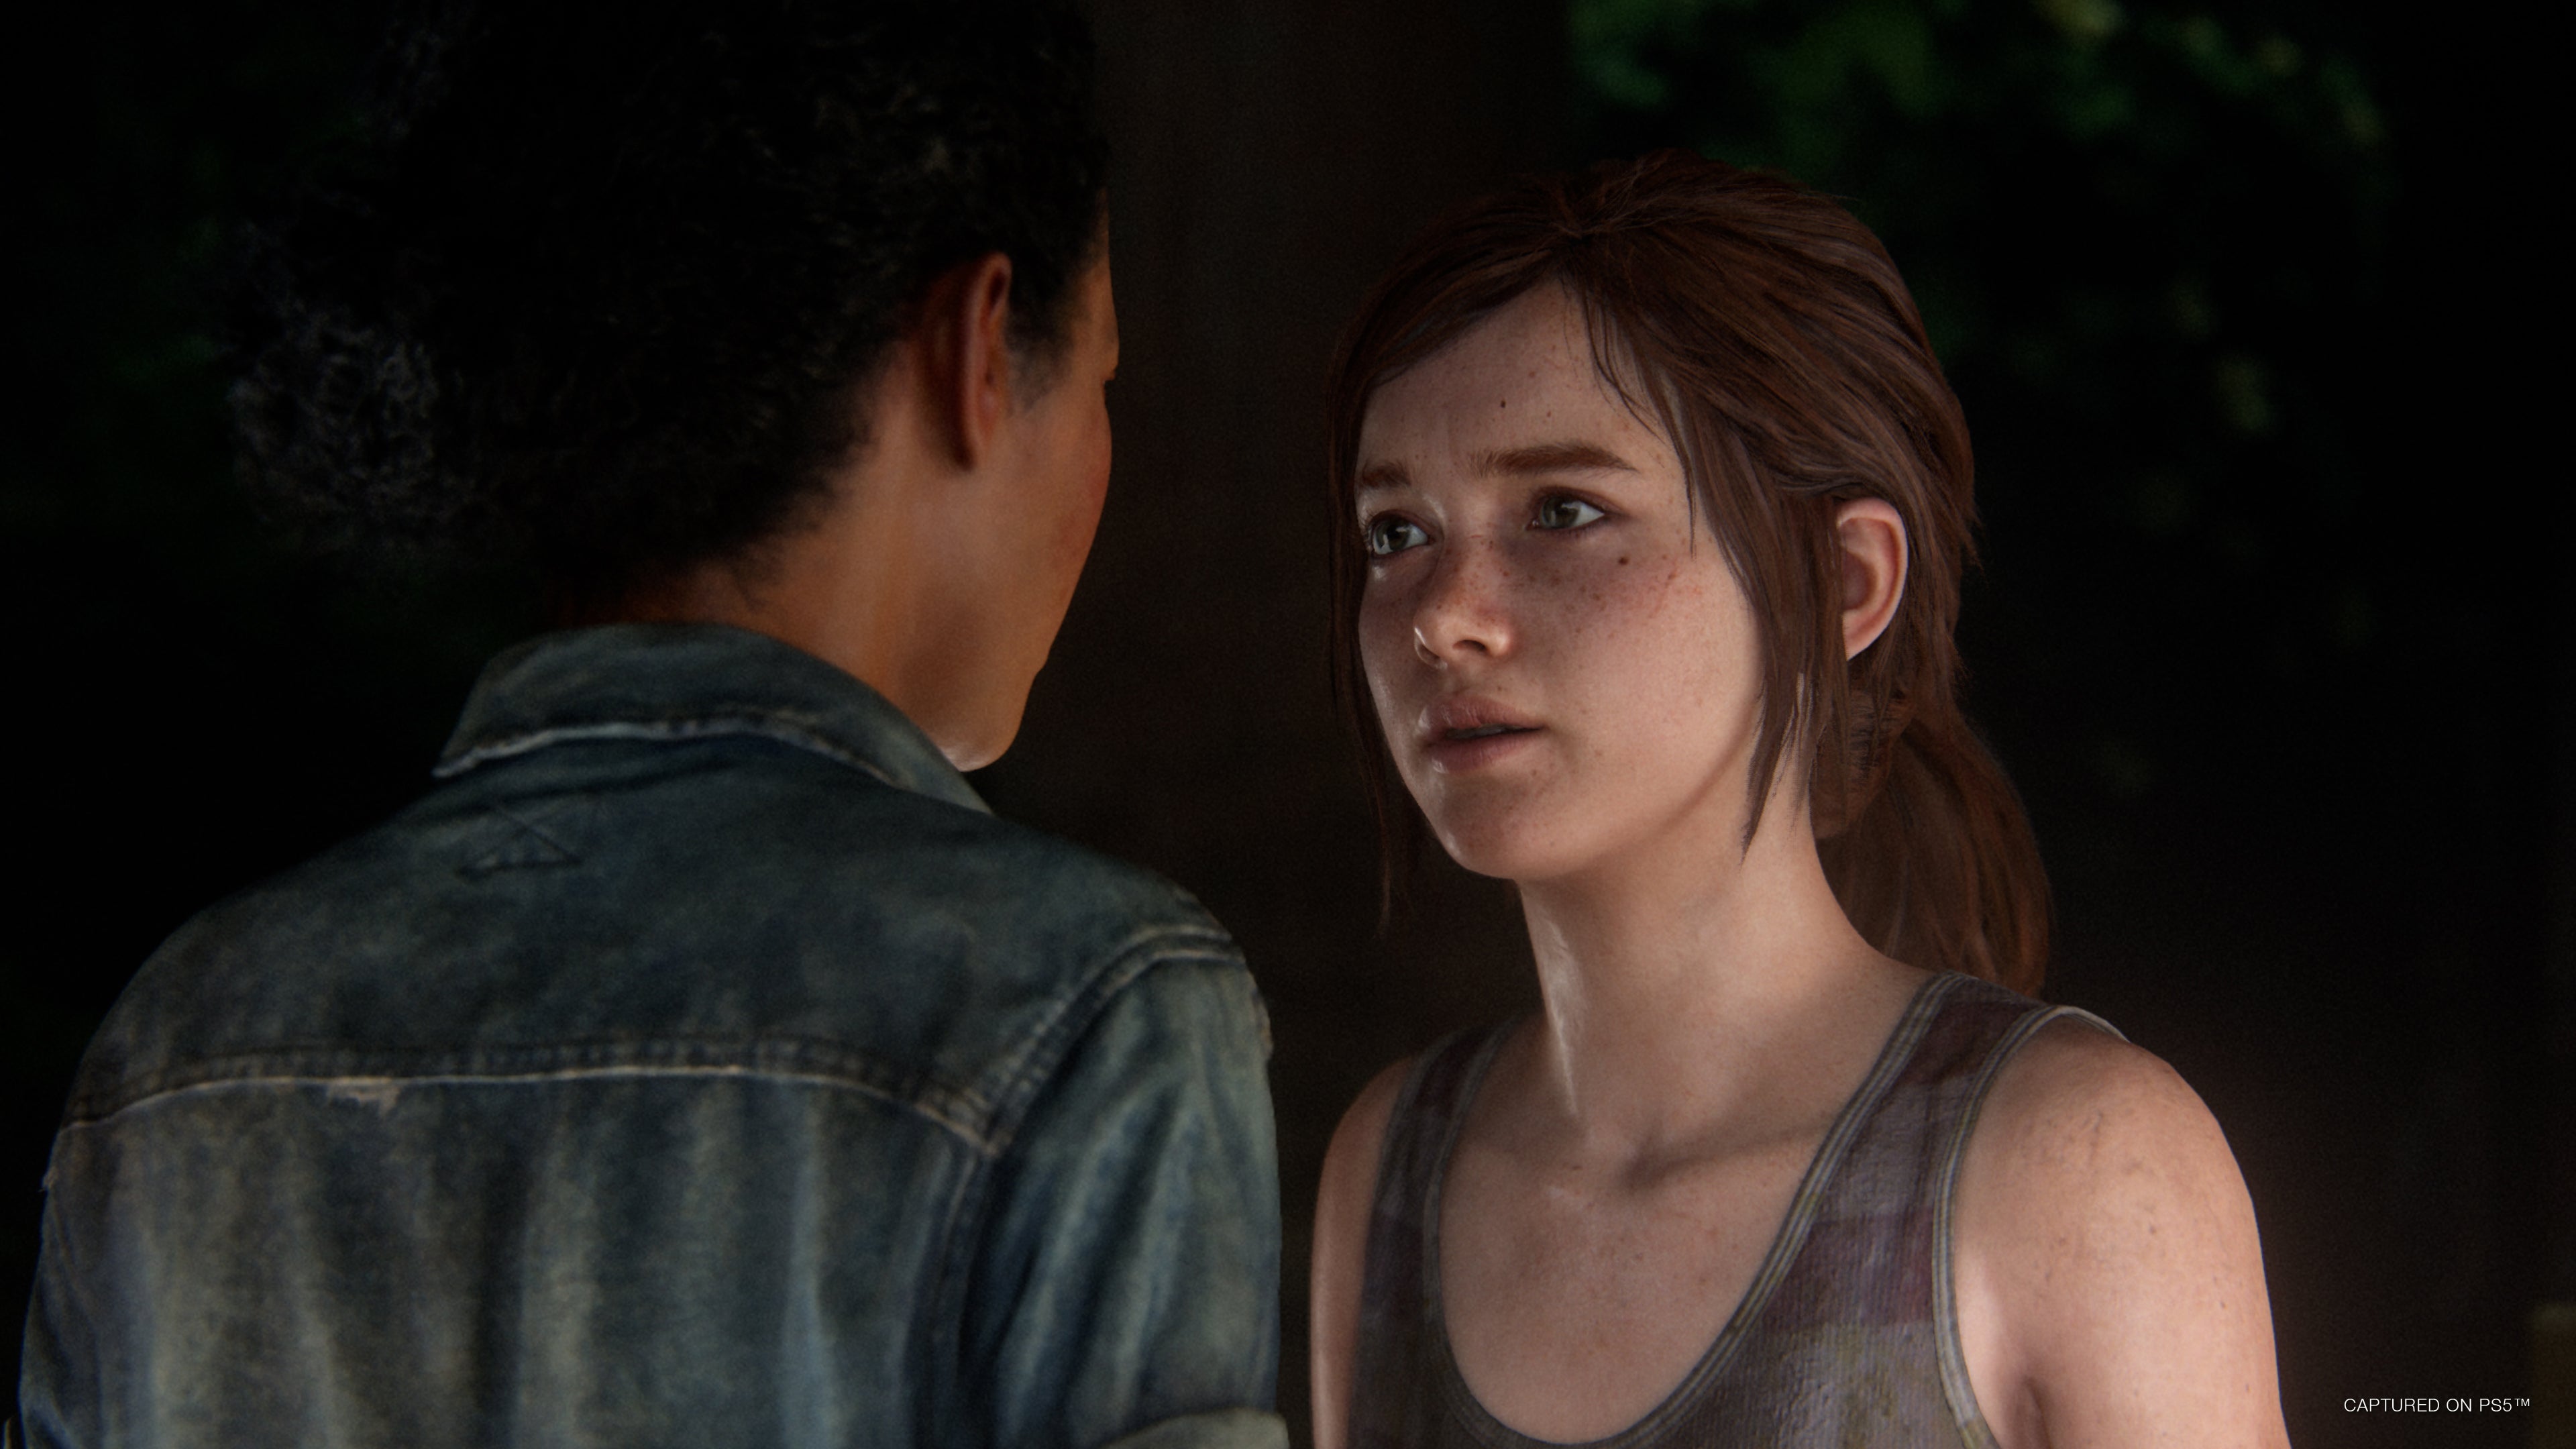 PS5 The Last of Us Part I - Albagame